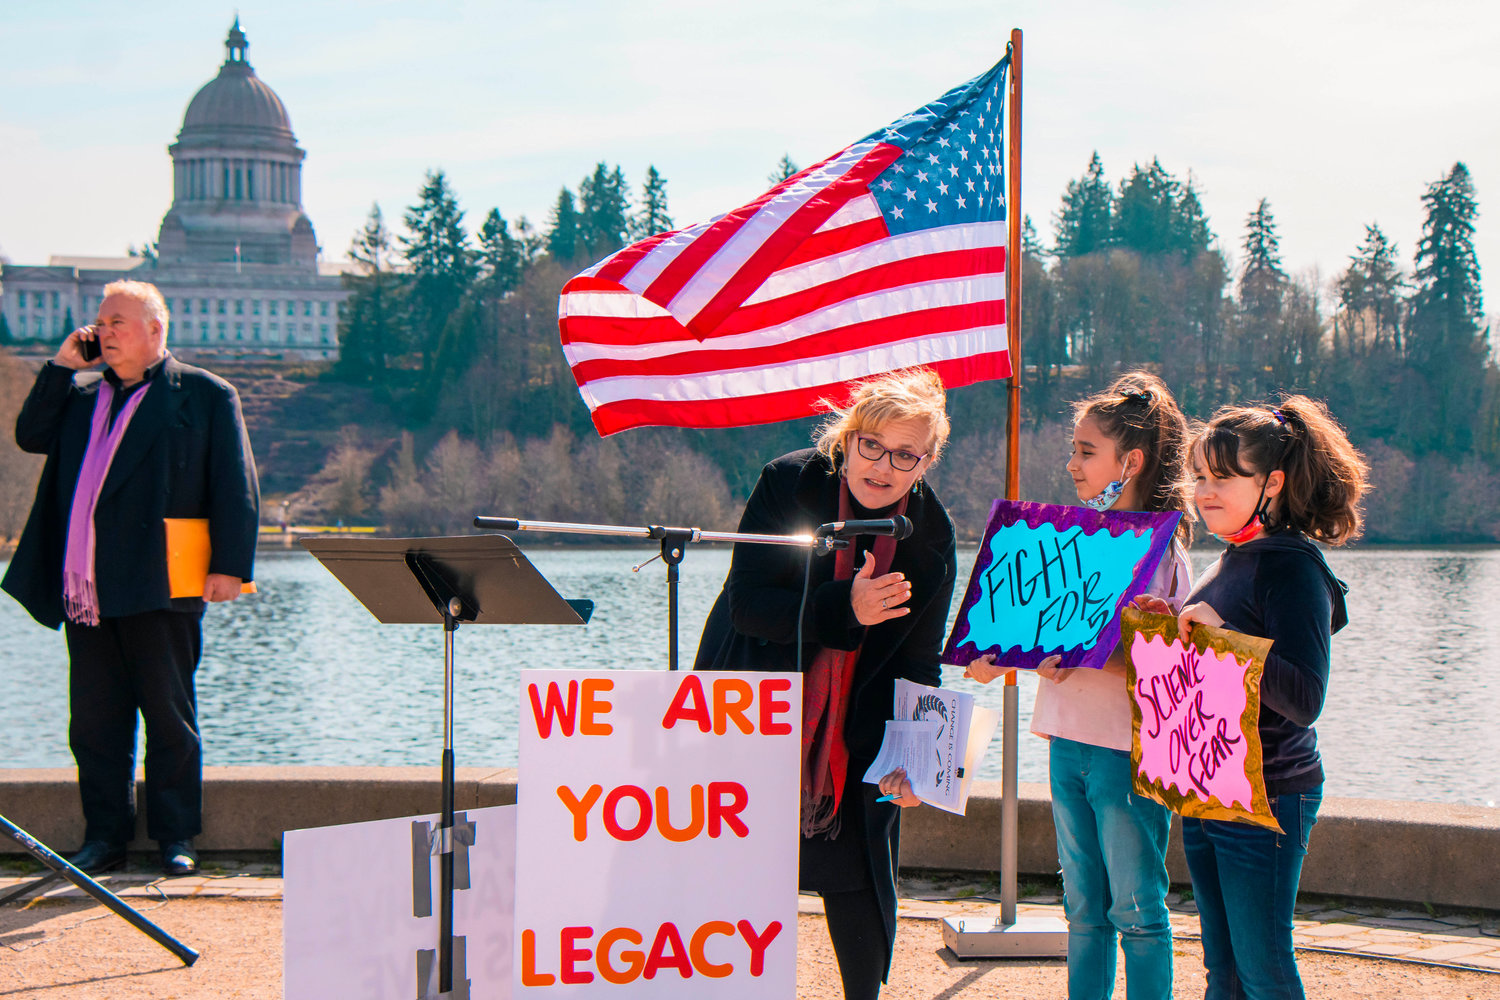 Kids hold signs as Michelle Darnell, President of the Ignite Foundation LLC, asks questions during a rally in support of bringing back in-person schooling near Capitol Lake on Saturday in Olympia.